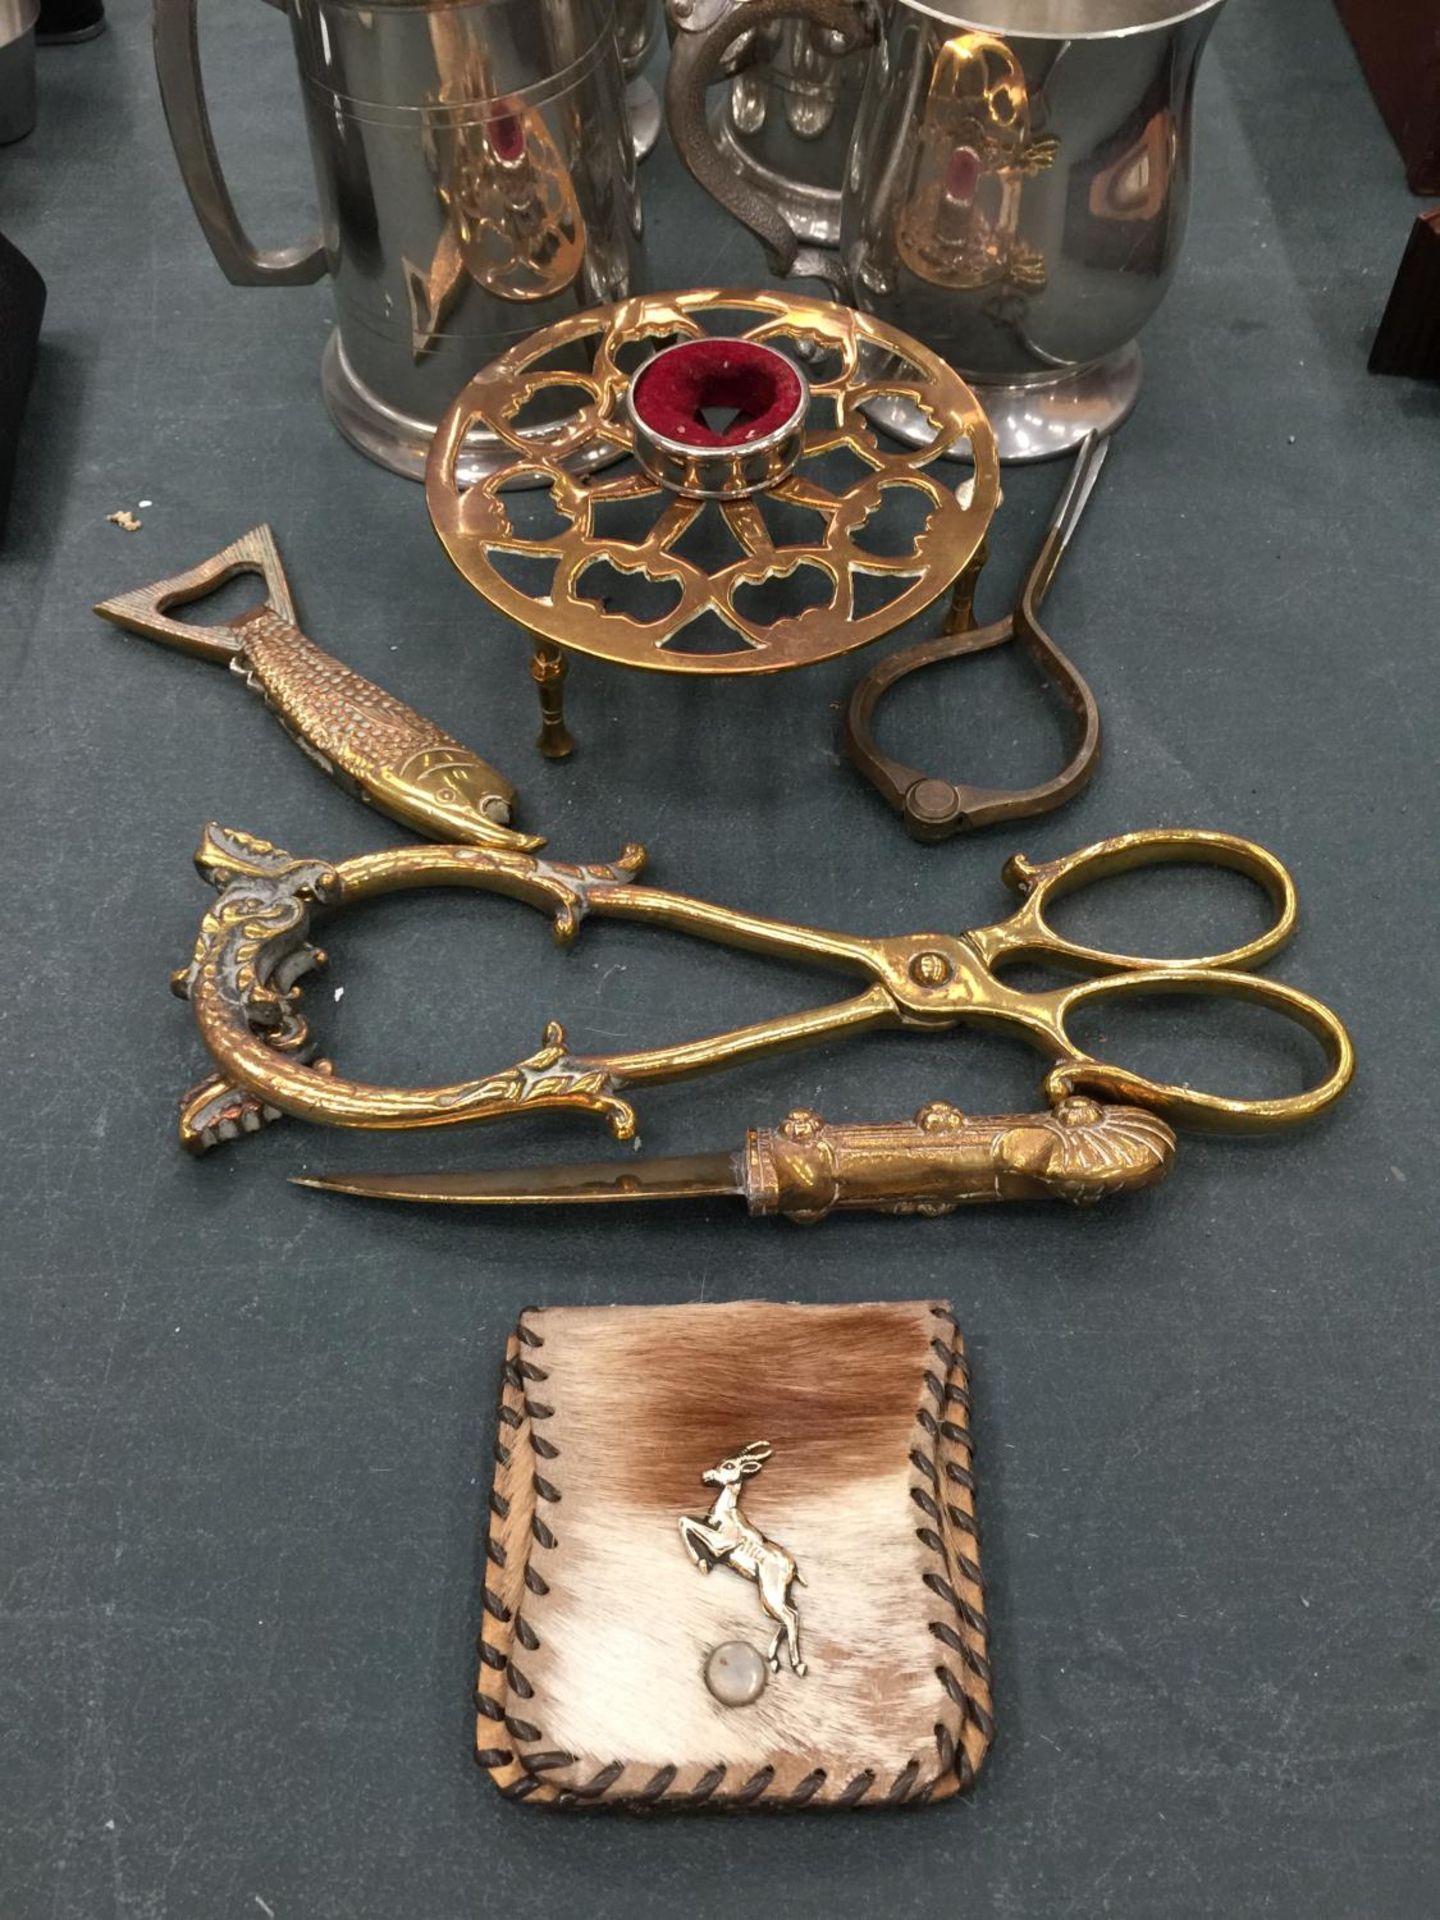 FOUR SILVER PLATED TANKARDS PLUS BRASSWARE INCLUDING TONGS, A KNIFE, BOTTLE OPENER, ETC - Image 2 of 3